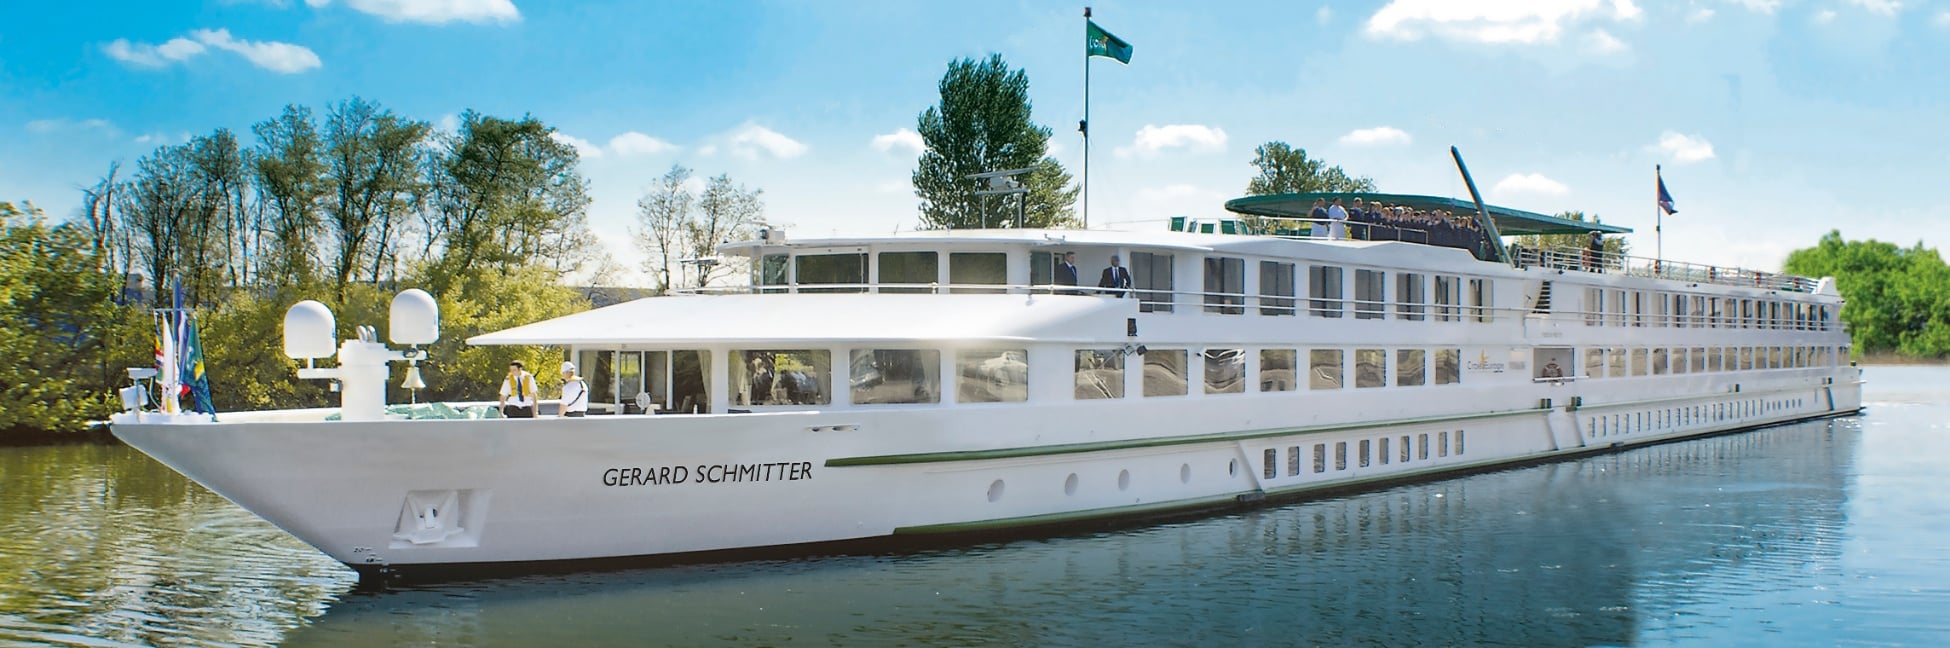 CroisiEurope’s 2023 River, Canal & Ocean Itineraries Now On Sale – Early Booking Discount Of Up To 15% On Most Itineraries –